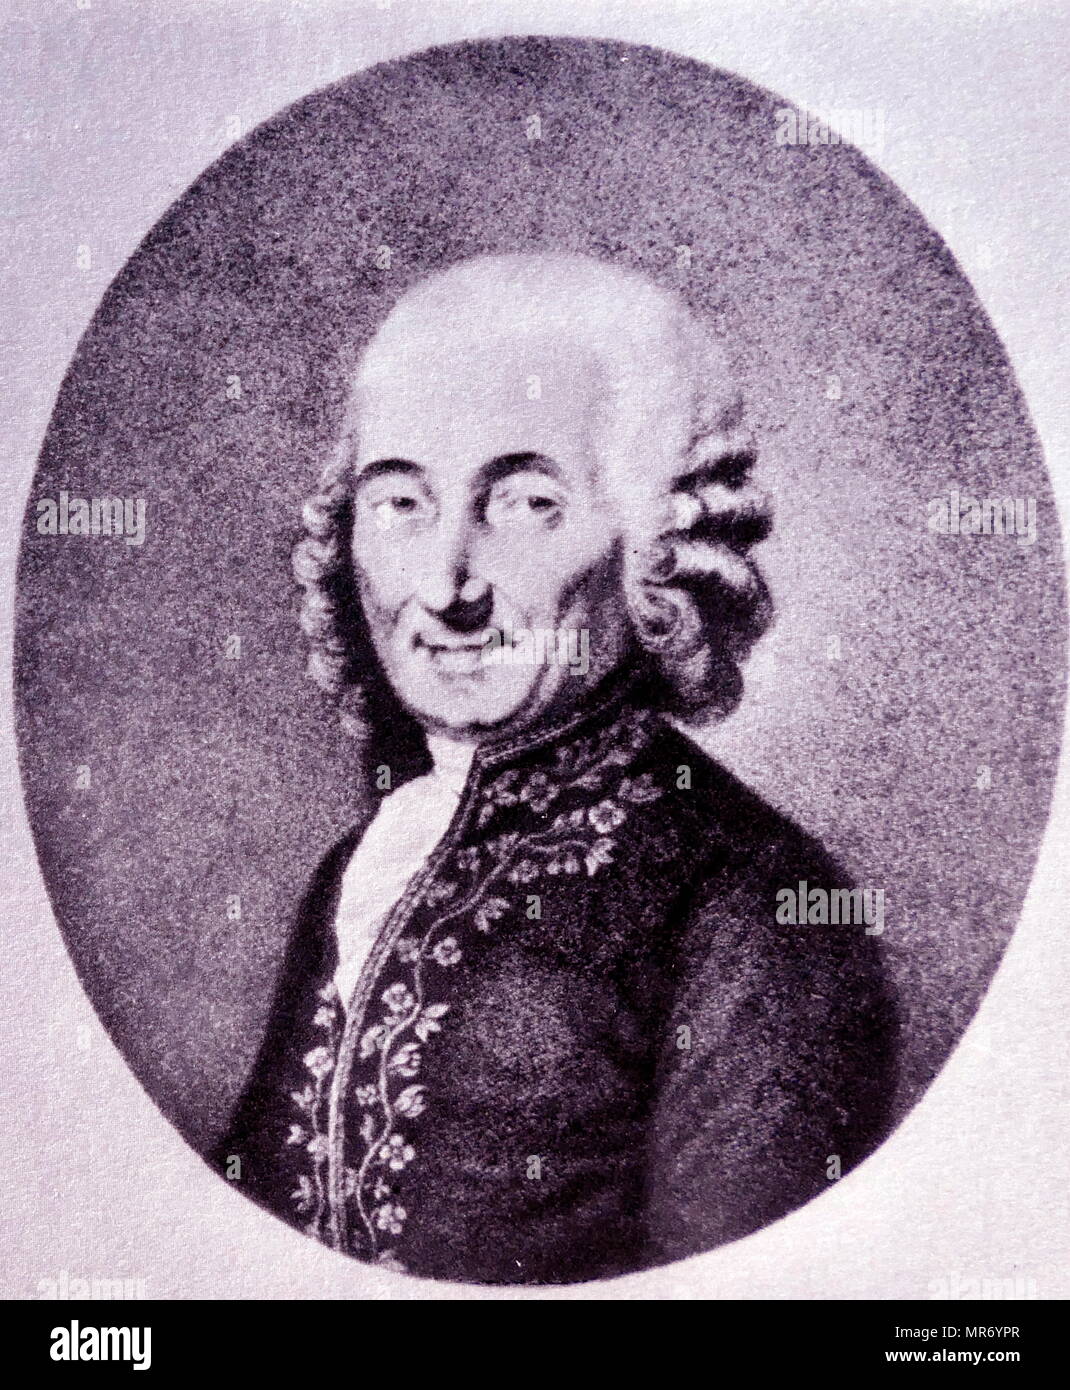 Portrait by Richardiere depicting Luigi Boccherini, (1743 – 1805), an Italian classical era composer and cellist whose music retained a courtly and galante style while he matured somewhat apart from the major European musical centres. Stock Photo